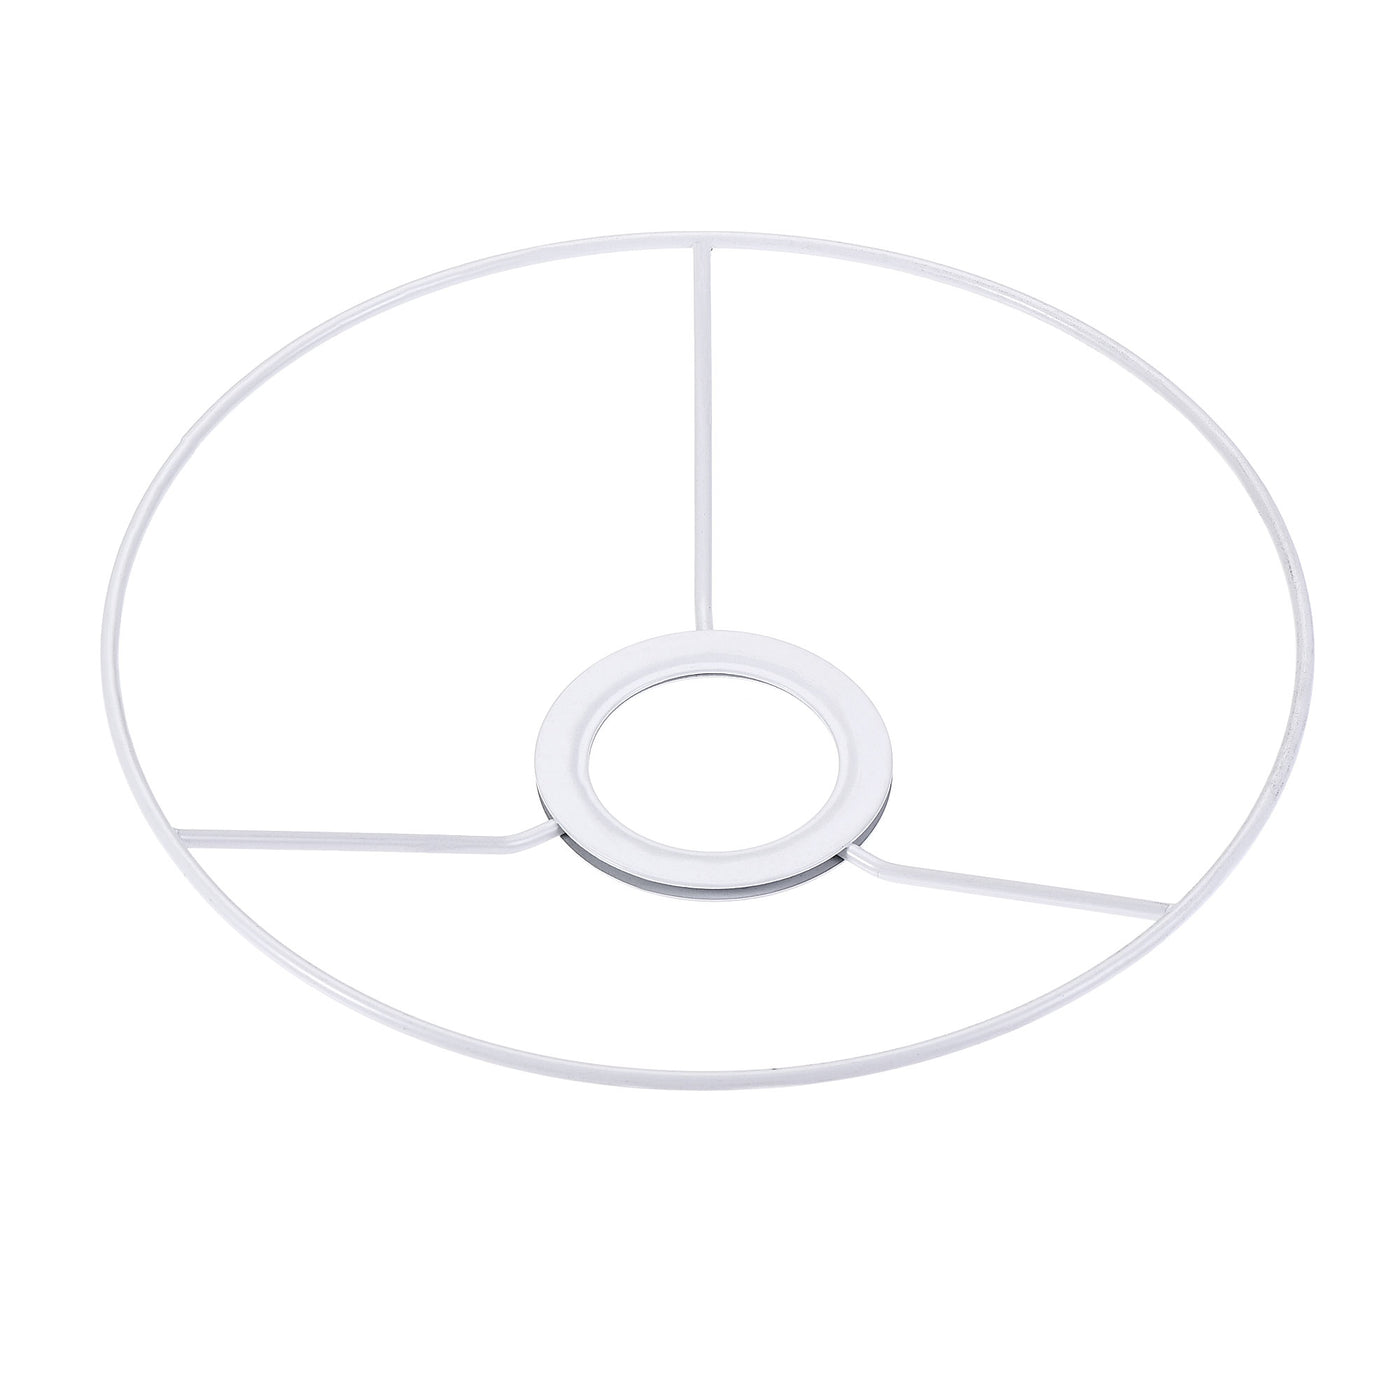 uxcell Uxcell Lamp Shade Ring, 200mm Dia. Lampshade Holder Frame Ring for E26/E27 Lamp Socket, Baked Coating Iron 2 Set